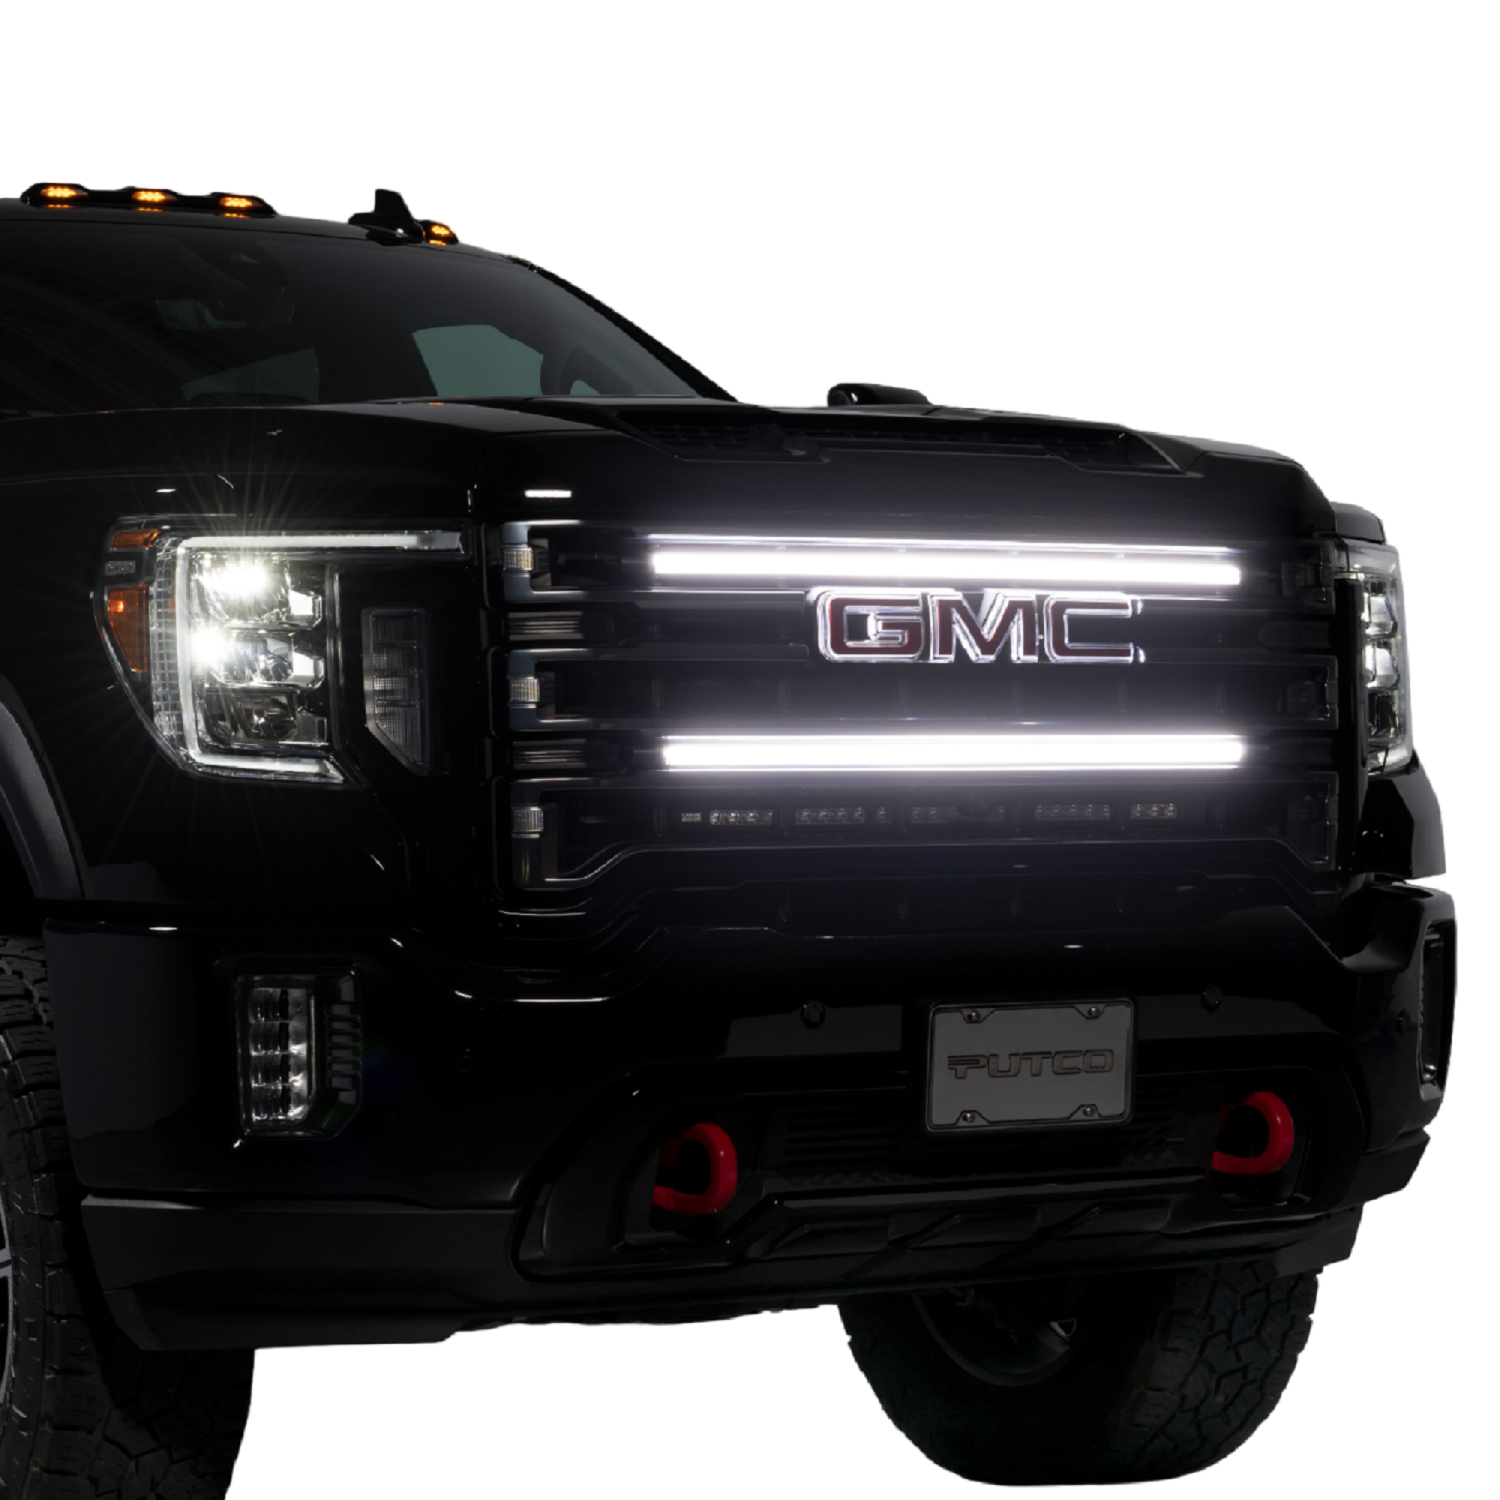 https://www.putco.com/wp-content/uploads/Putco-Virtual-Blade-DRL-LED-Grille-Light-Bars-Universal-fitment-with-an-OEM-Look-e1689291392849.png